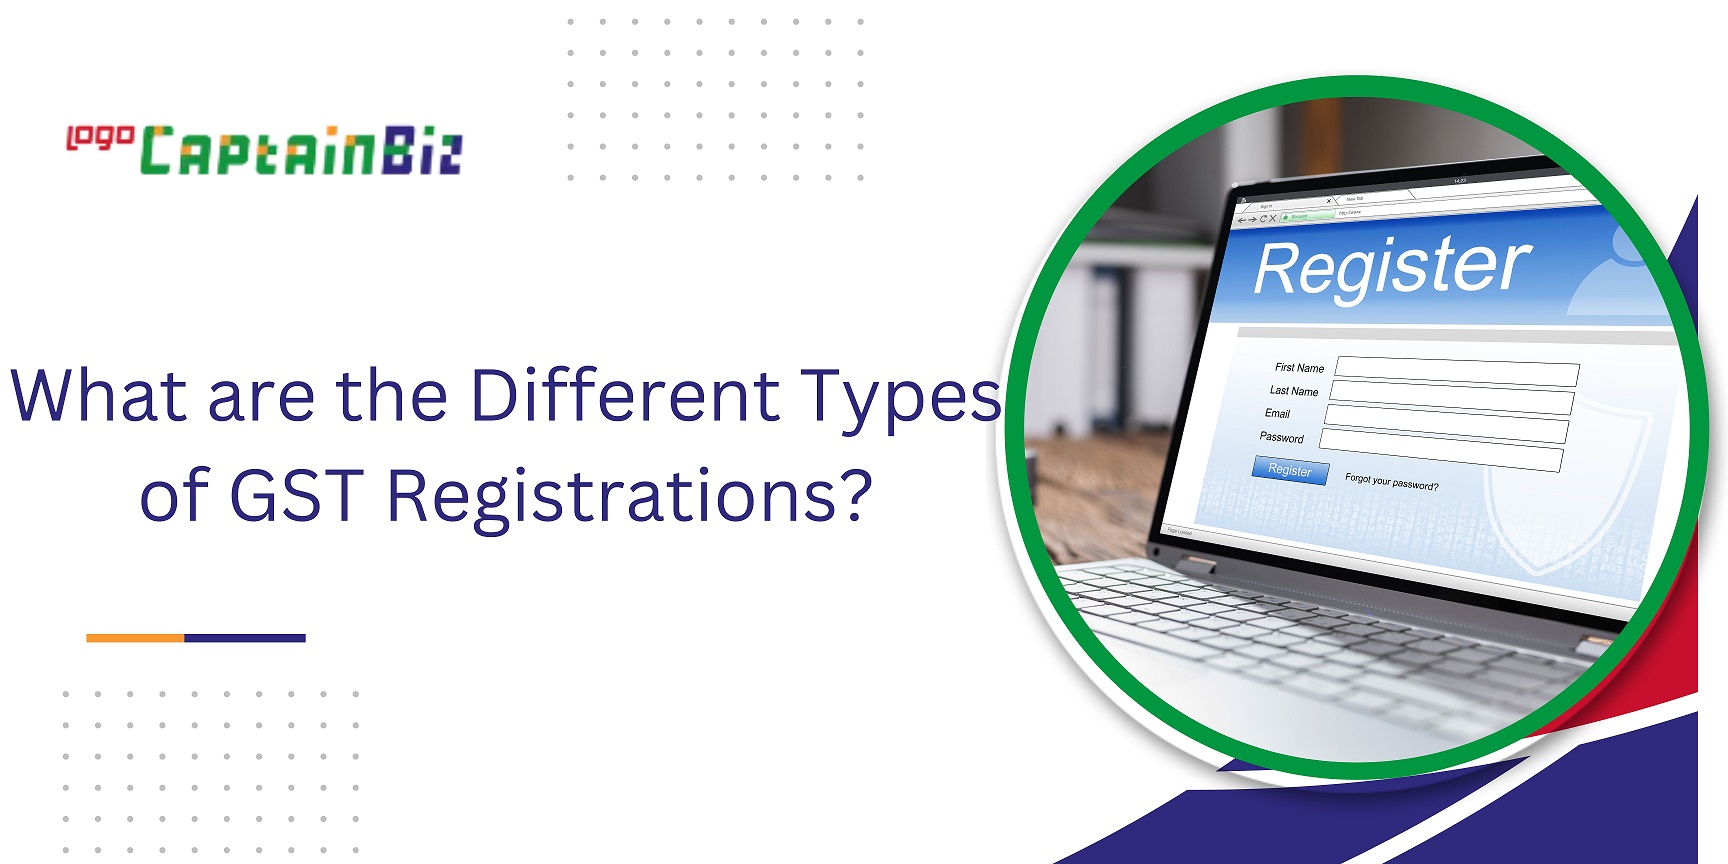 CaptainBiz: What are the Different Types of GST Registrations